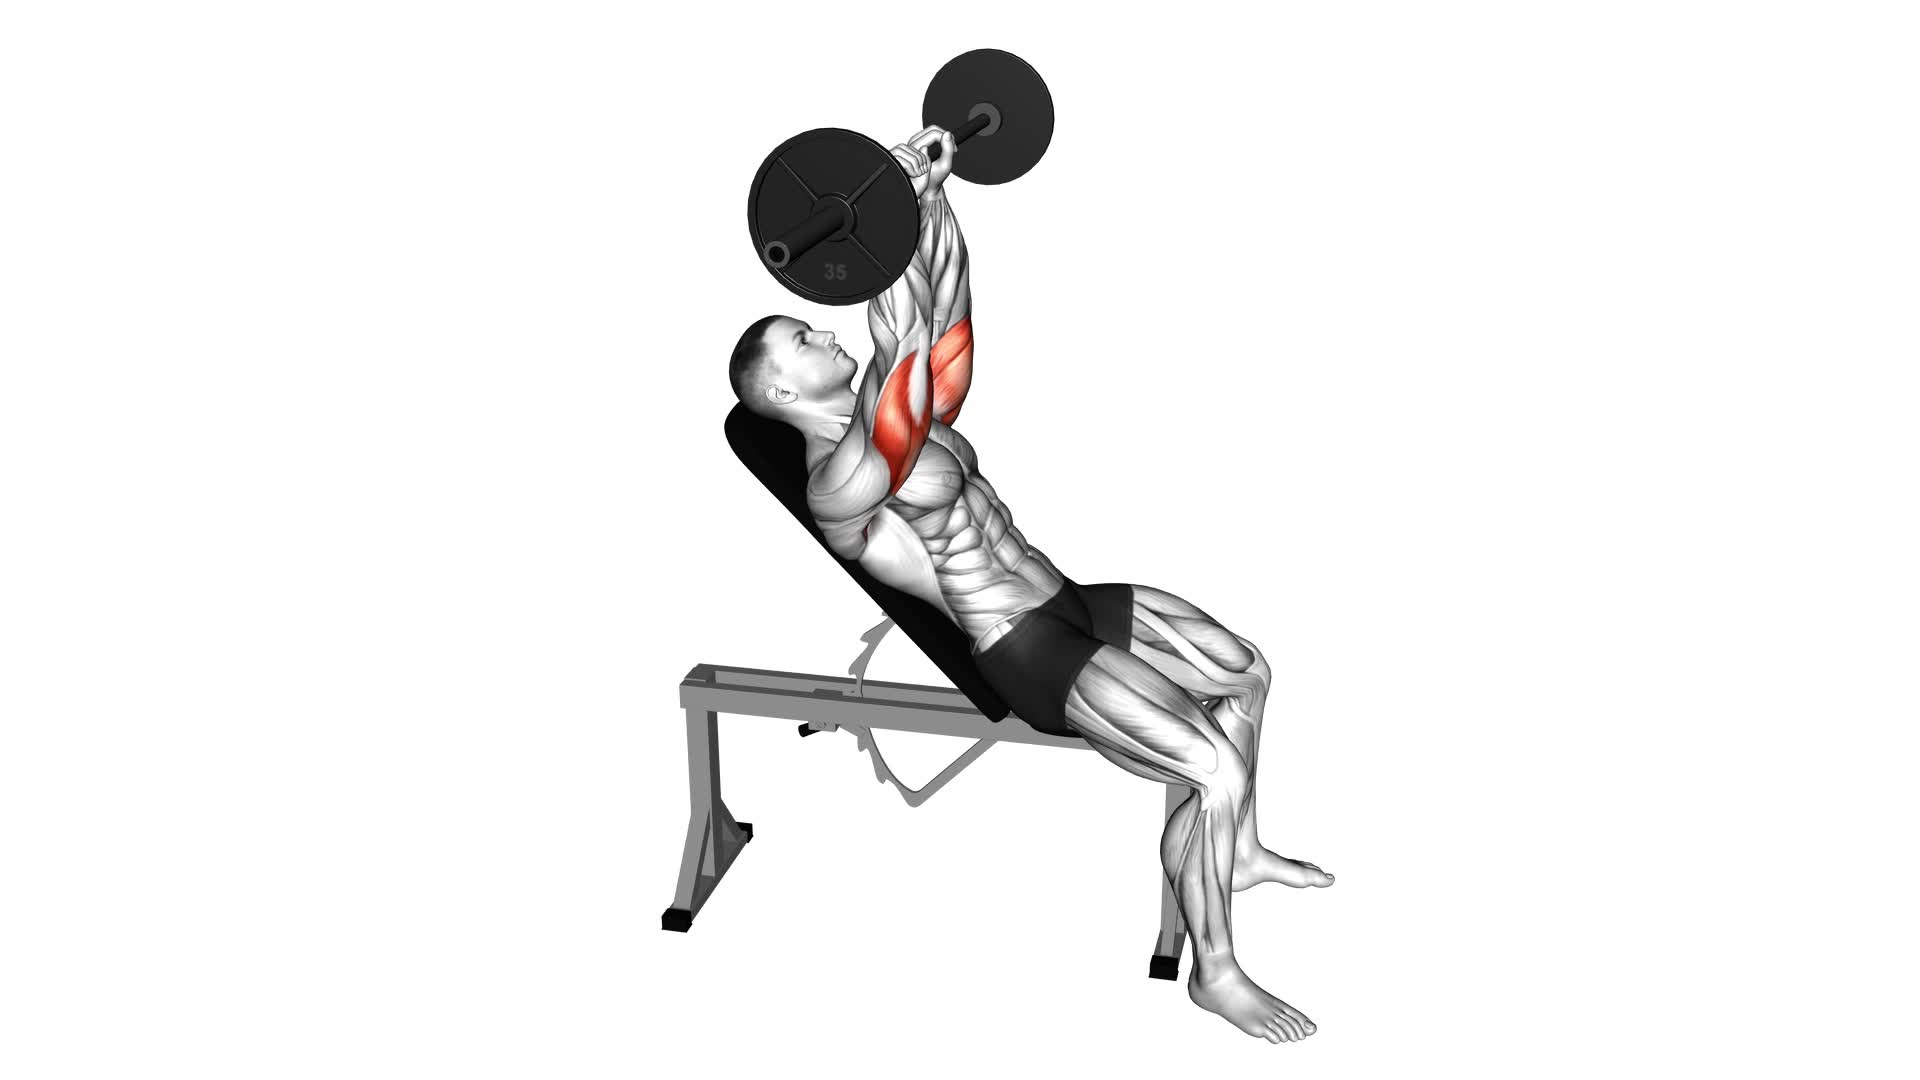 Barbell Incline Triceps Extension Skull Crusher - Video Exercise Guide & Tips